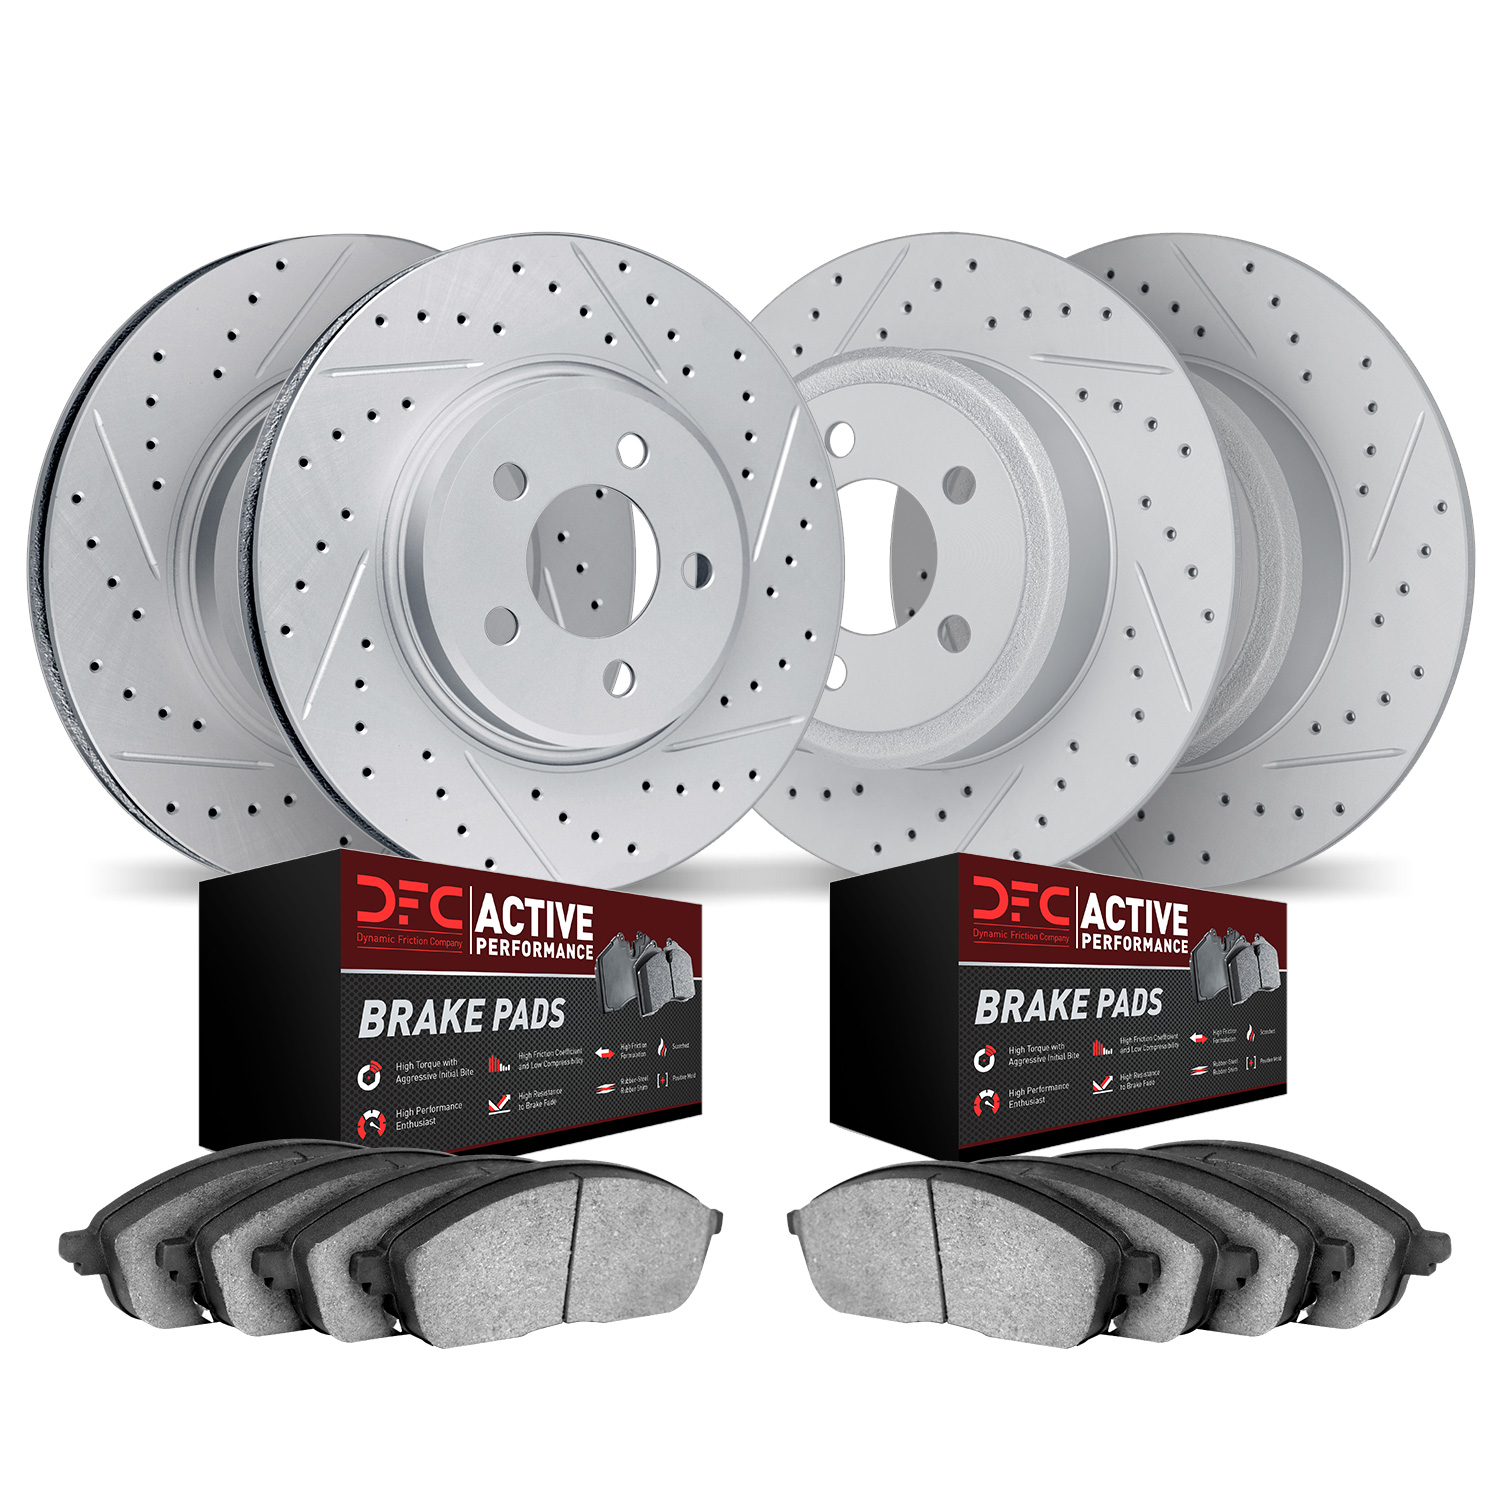 2704-13018 Geoperformance Drilled/Slotted Brake Rotors with Active Performance Pads Kit, 2005-2005 Subaru, Position: Front and R